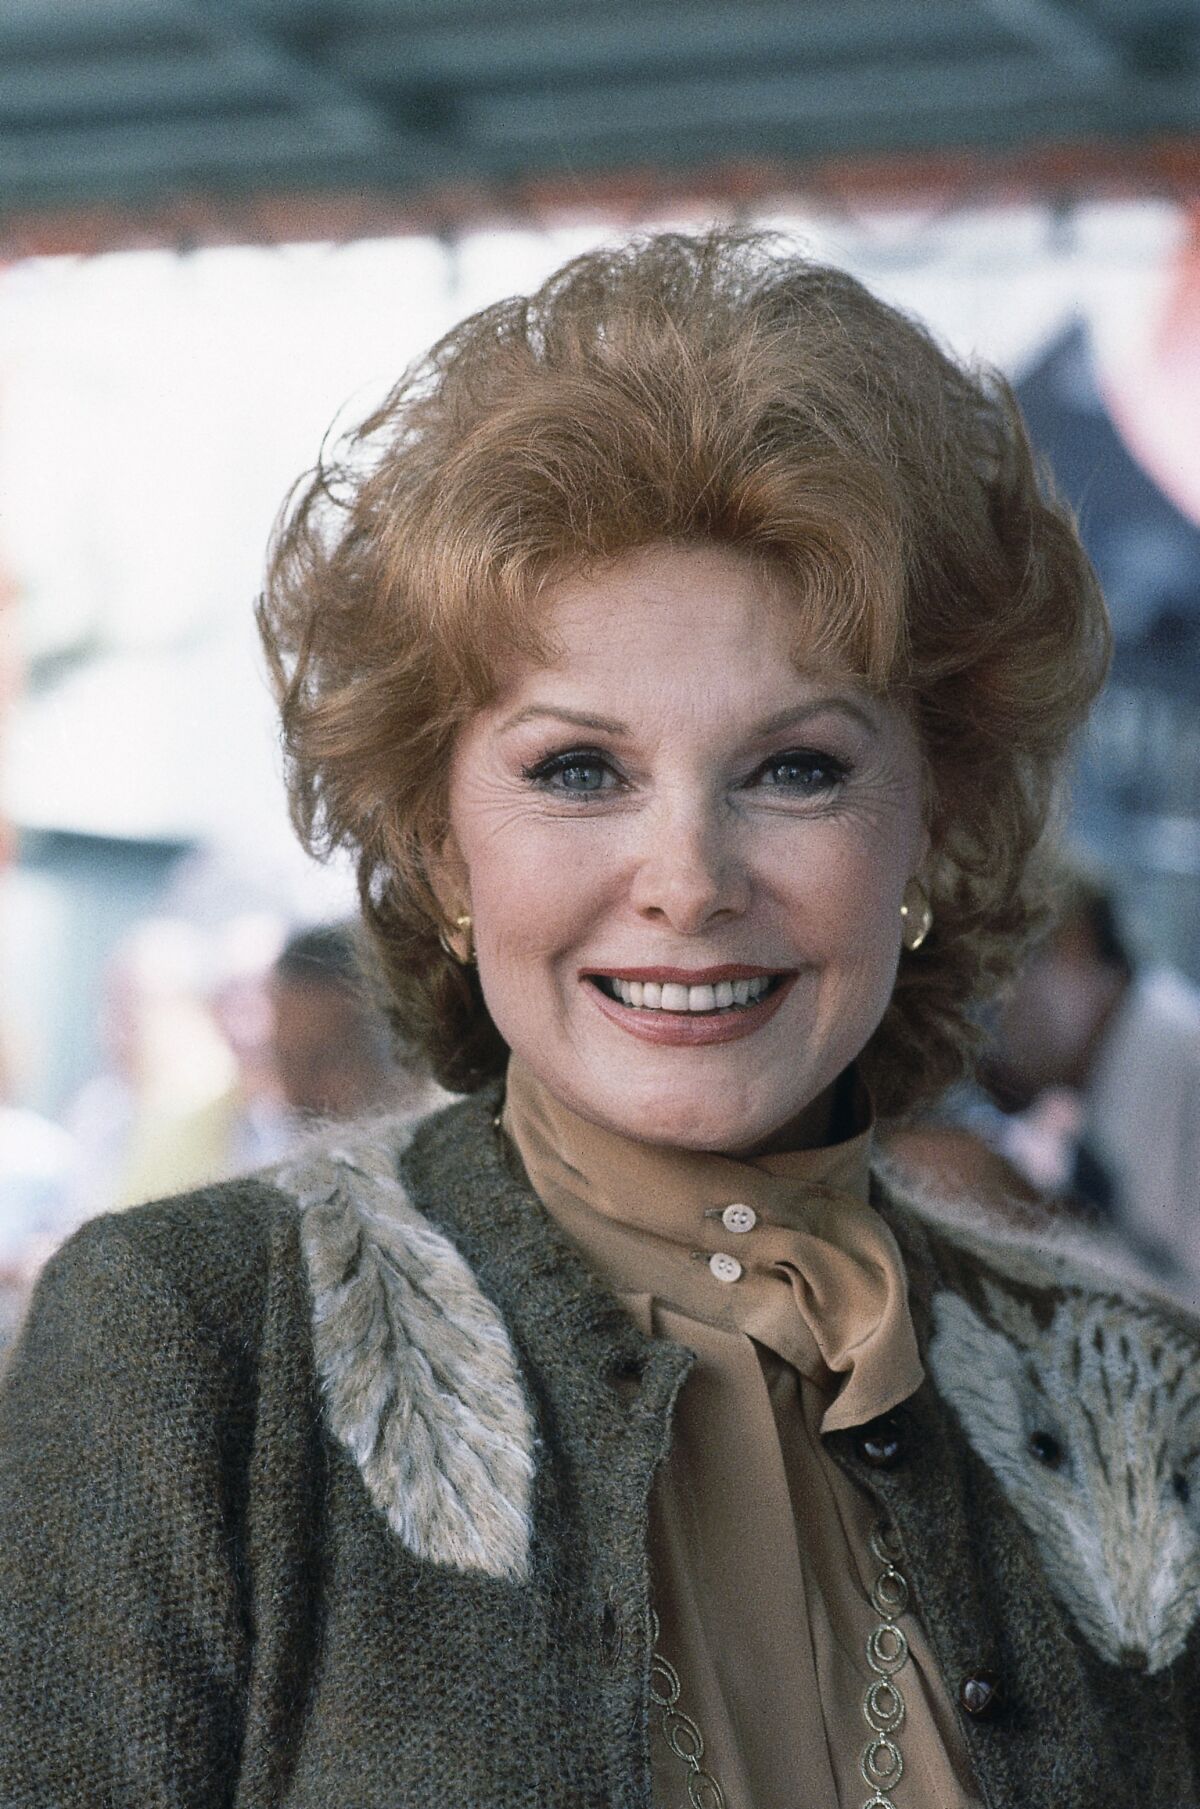 FILE - In this Sept. 28, 1981 file photo, Actress Rhonda Fleming poses for a photo in Hollywood, Calif. Actress Rhonda Fleming, the fiery redhead who appeared with Burt Lancaster, Kirk Douglas, Charlton Heston, Ronald Reagan and other film stars of the 1940s and 1950s, has died, Wednesday, Oct. 14, 2020. She was 97.(AP Photo/Wally Fong)